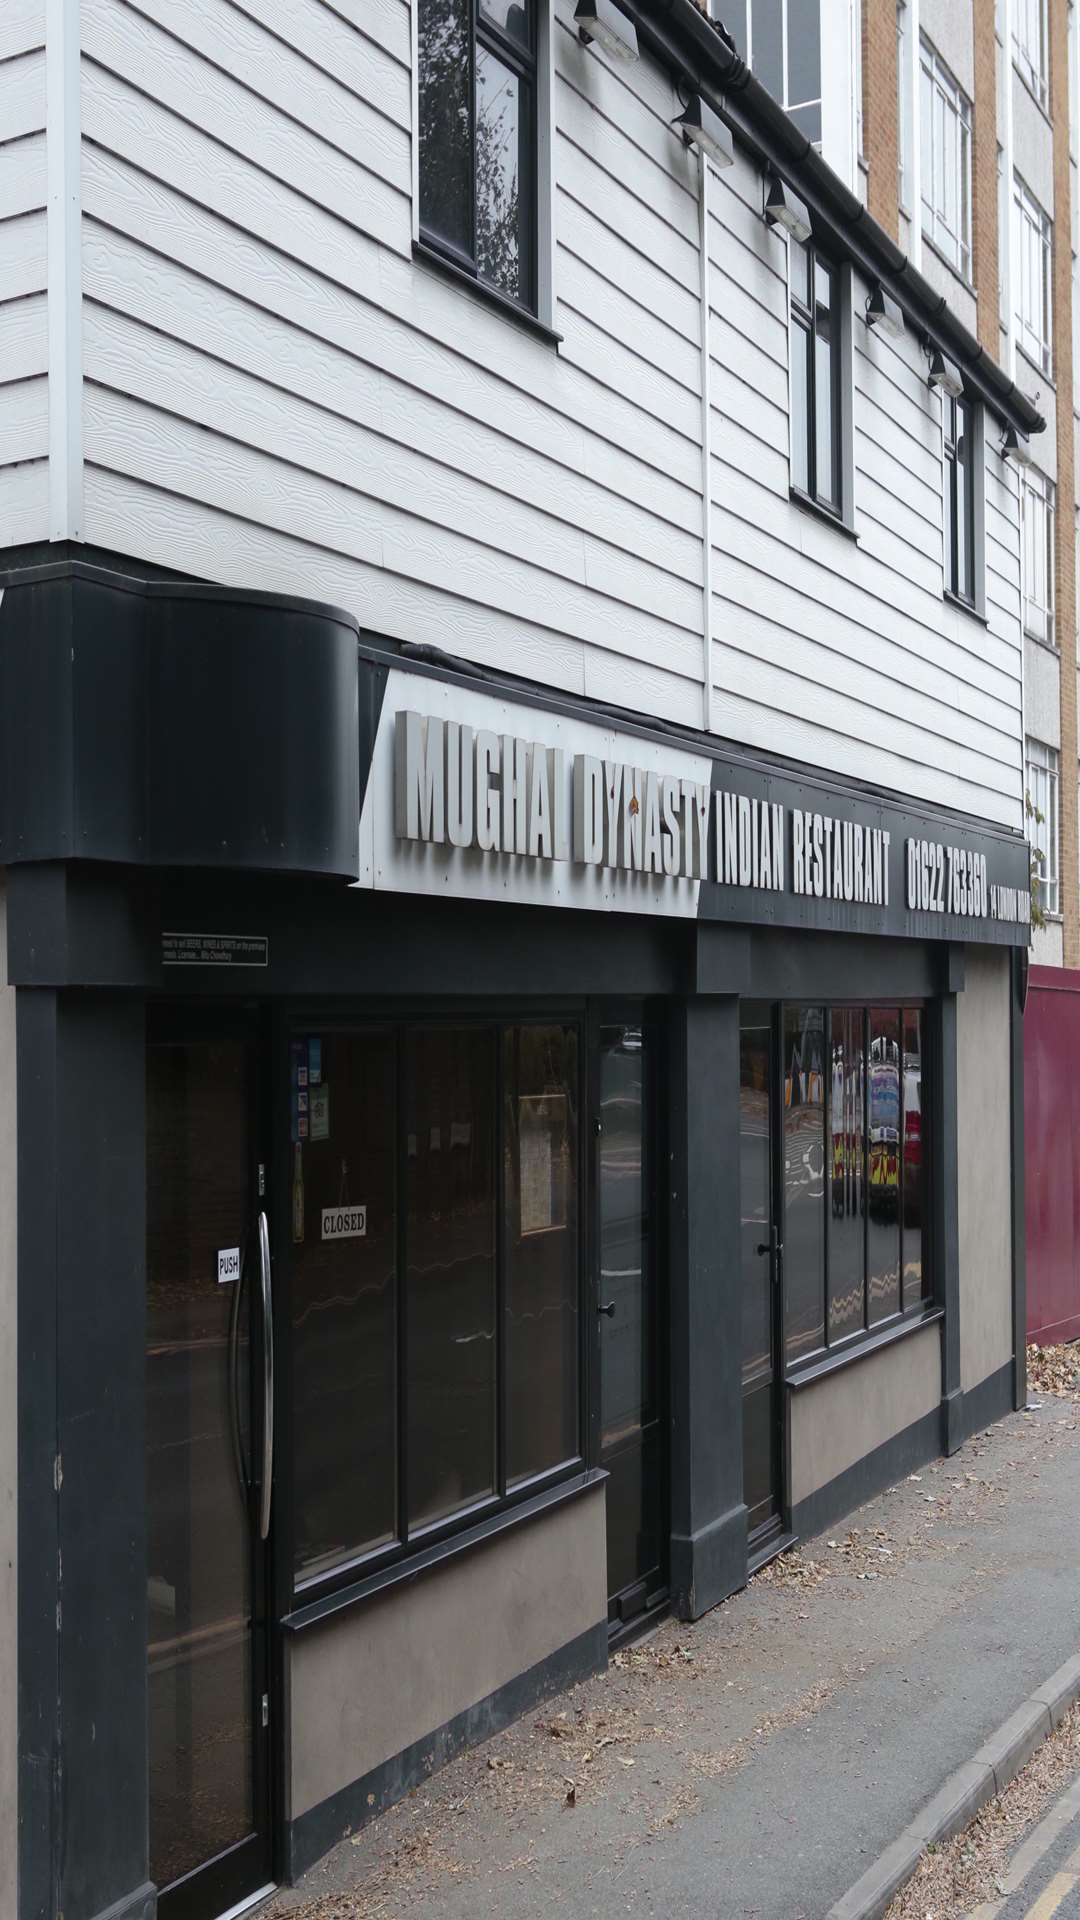 The Mughal Dynasty, London Road, has been fined £50,000